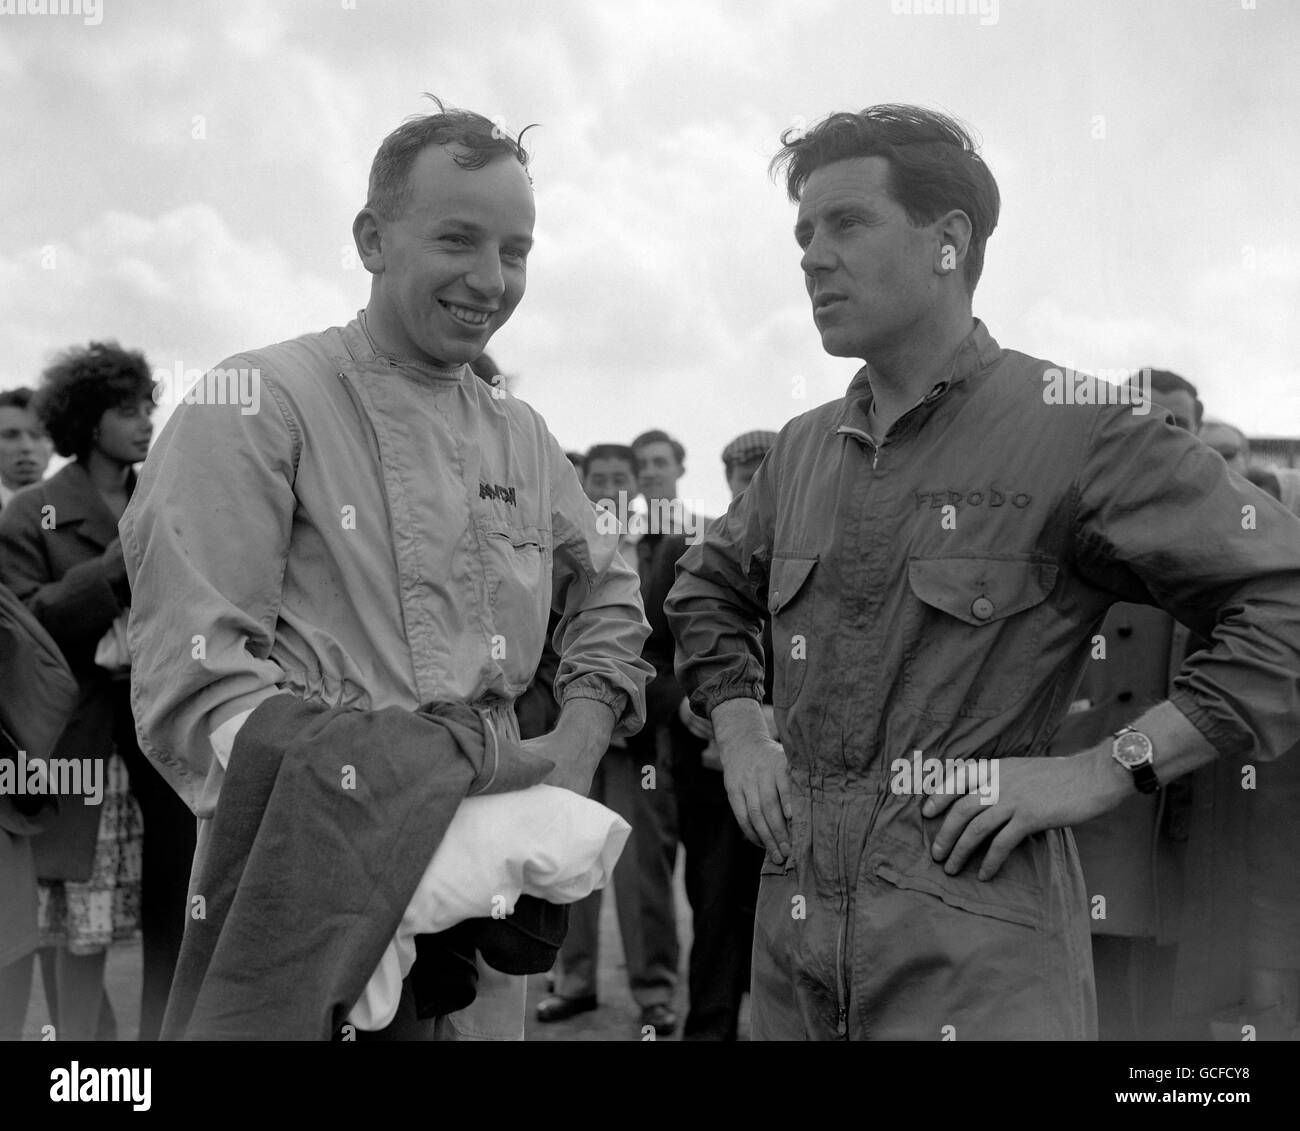 John Surtees (left) and Geoff Duke, who both had World motorcycling championships, are taking up motor car racing. They met at the Silverstone track in Northamptonshire, where both competed in the May 14th meeting. Stock Photo